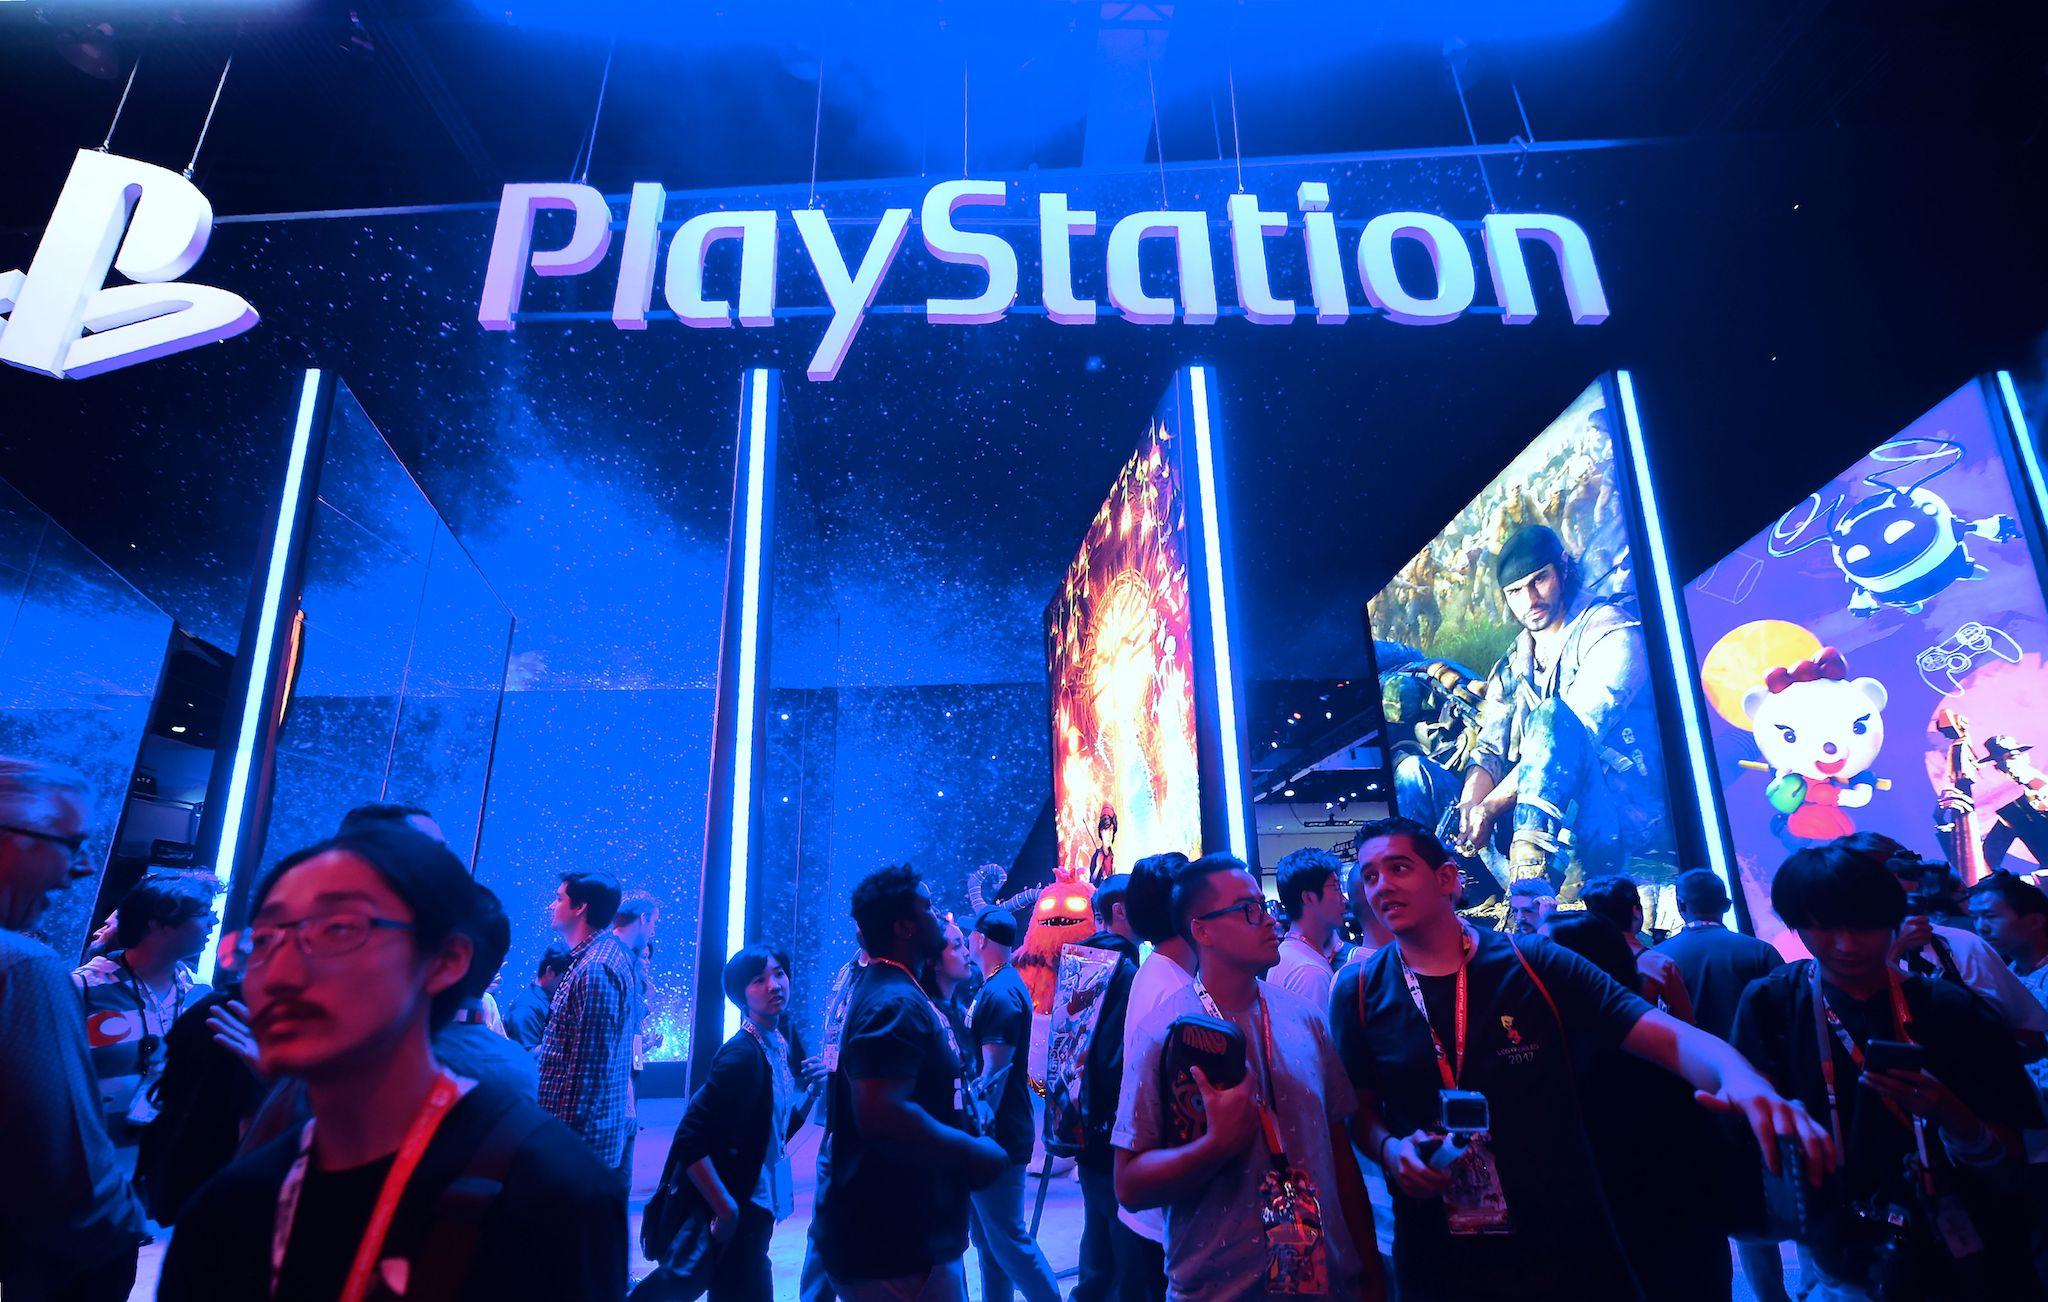 People wander in front of the Playstation posters at the 24th Electronic Expo, or E3 2018, in Los Angeles, California